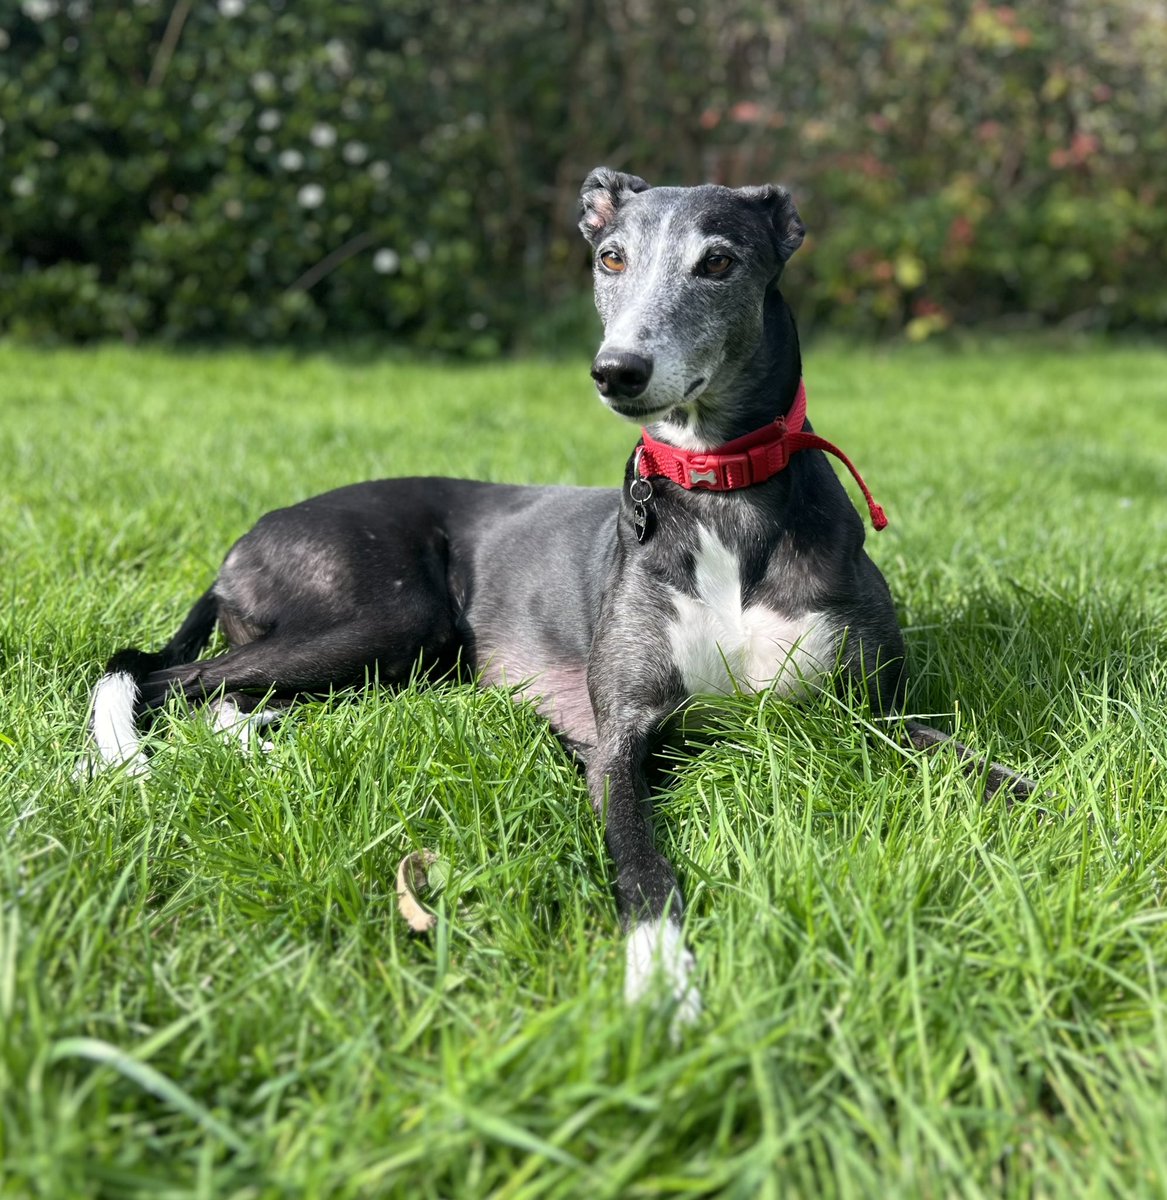 My girl knows spring is here🌼First bit of sun and she is loving it☀️

#retirednotrescued 
#retiredgreyhound